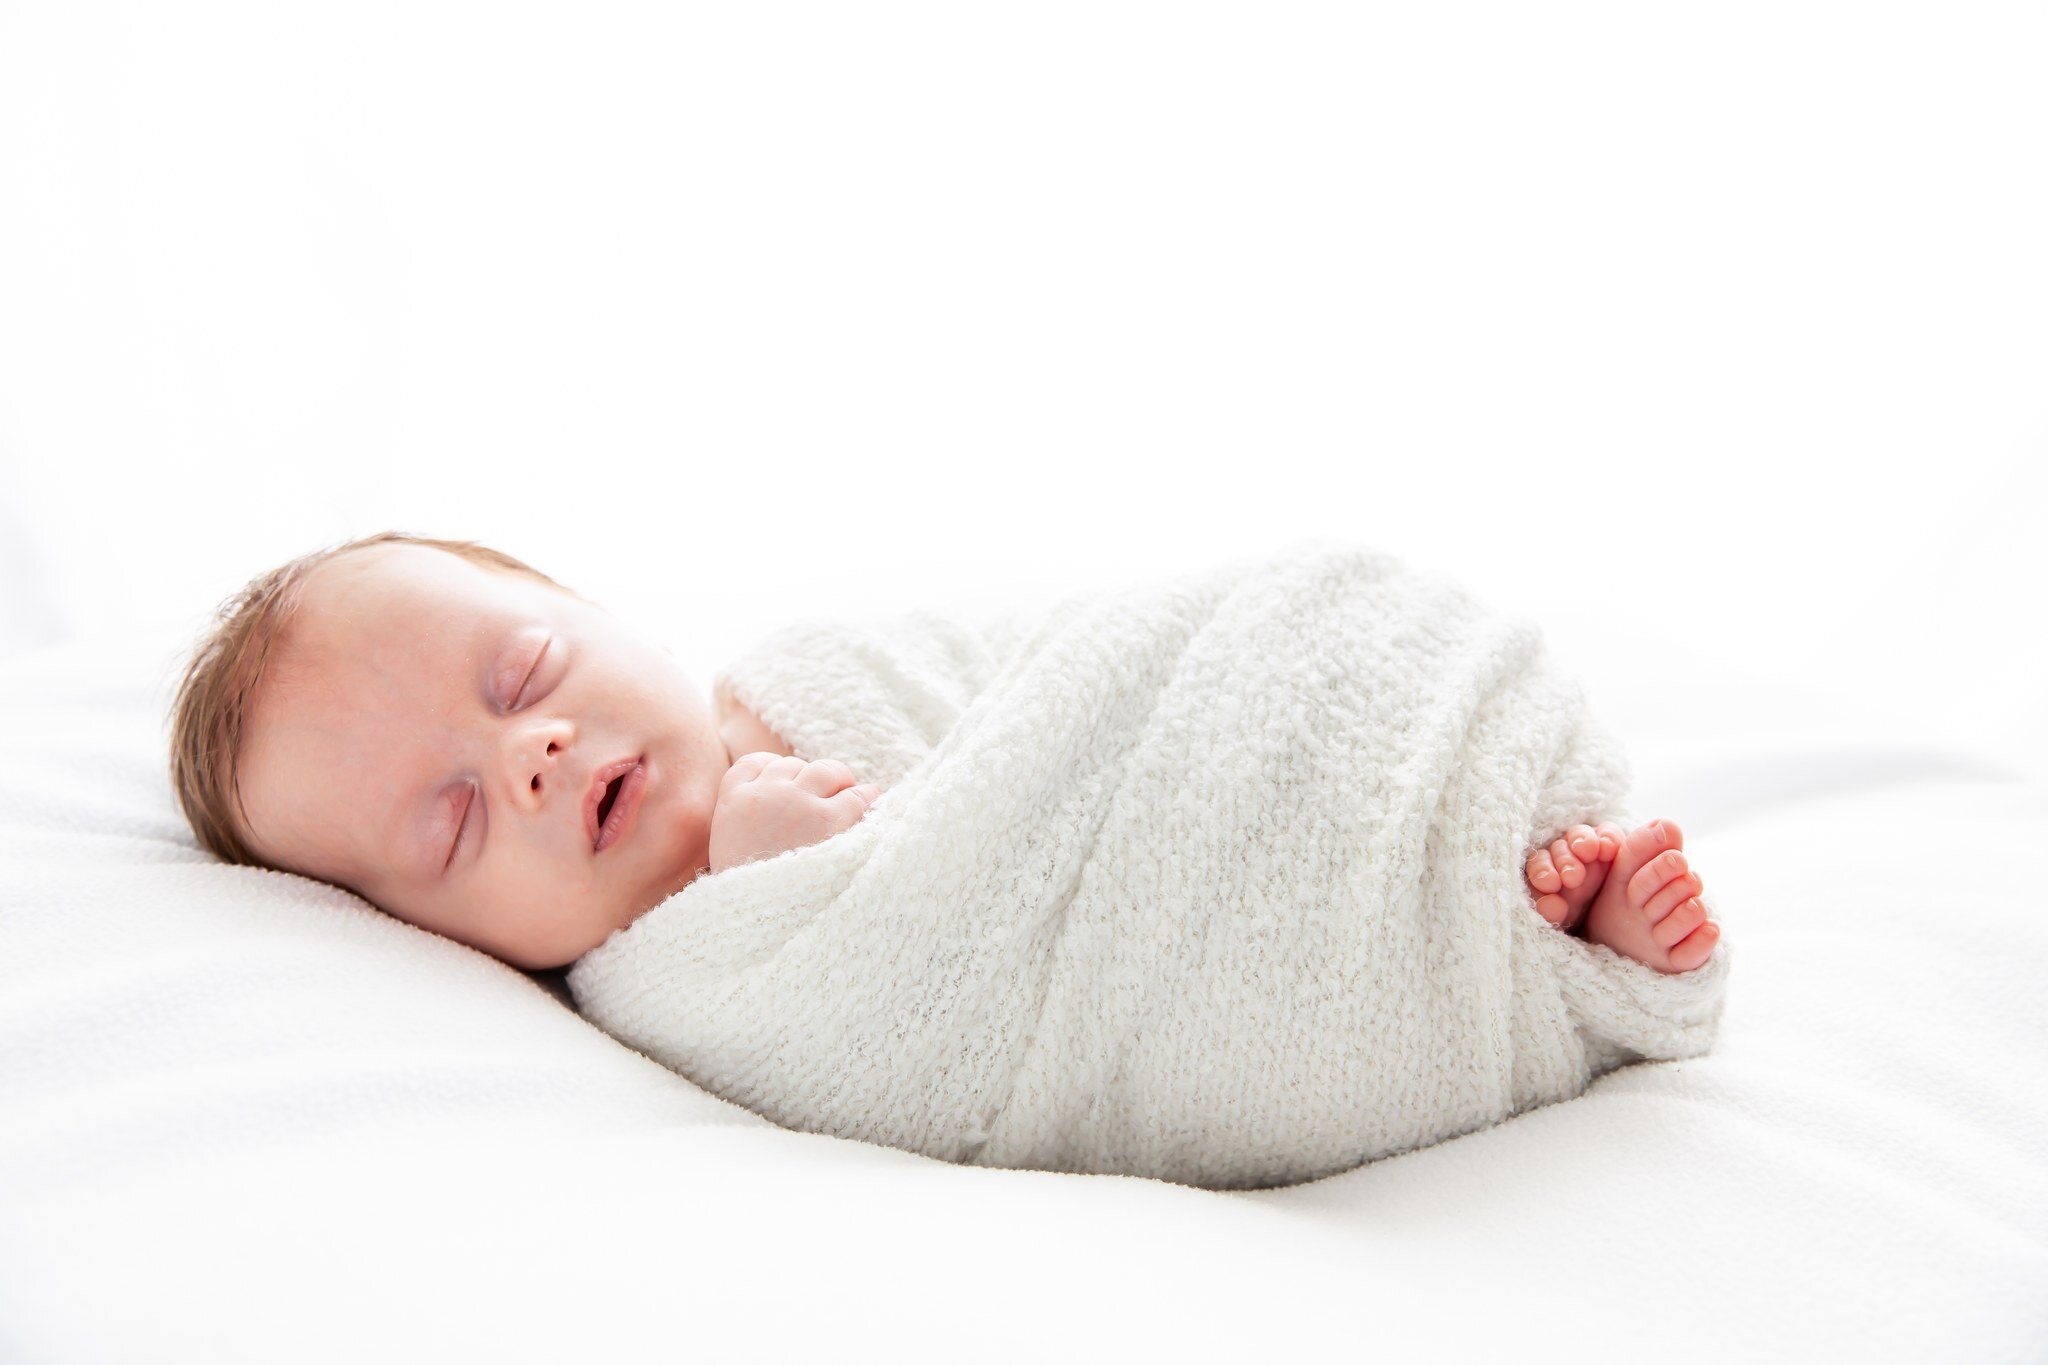 Newborn perfection 💖  This photo, like all my newborn photos, was taken in the comfort of my clients home. That's right, I bring my studio to your doorstep so that you don't have to worry about leaving your house with your newborn. Convenience and c